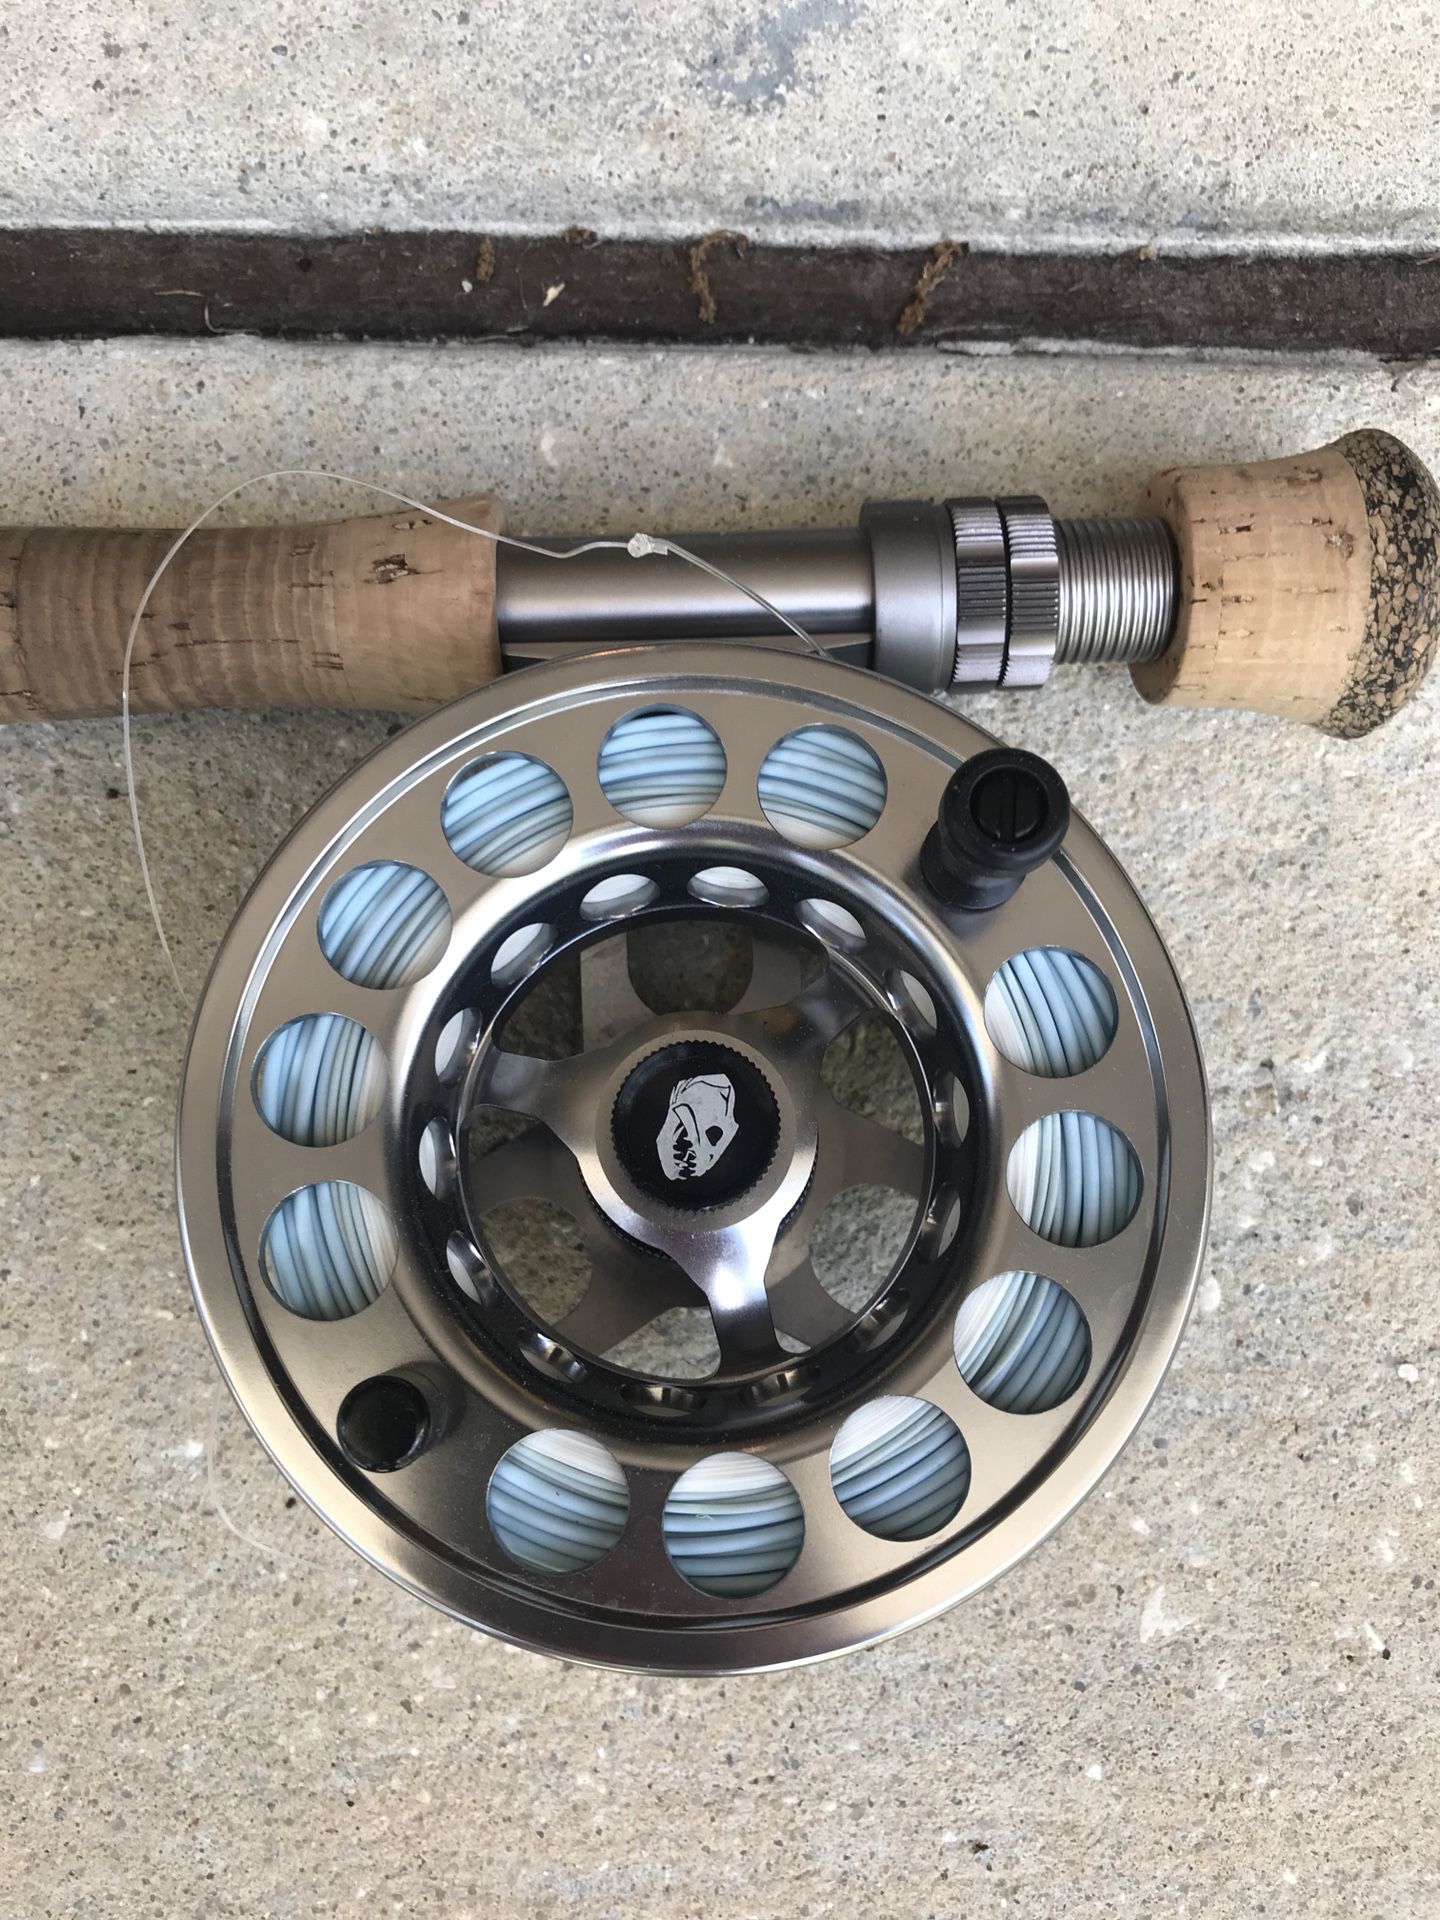 11 weight good cup fly reel w/rod, barely used! for Sale in